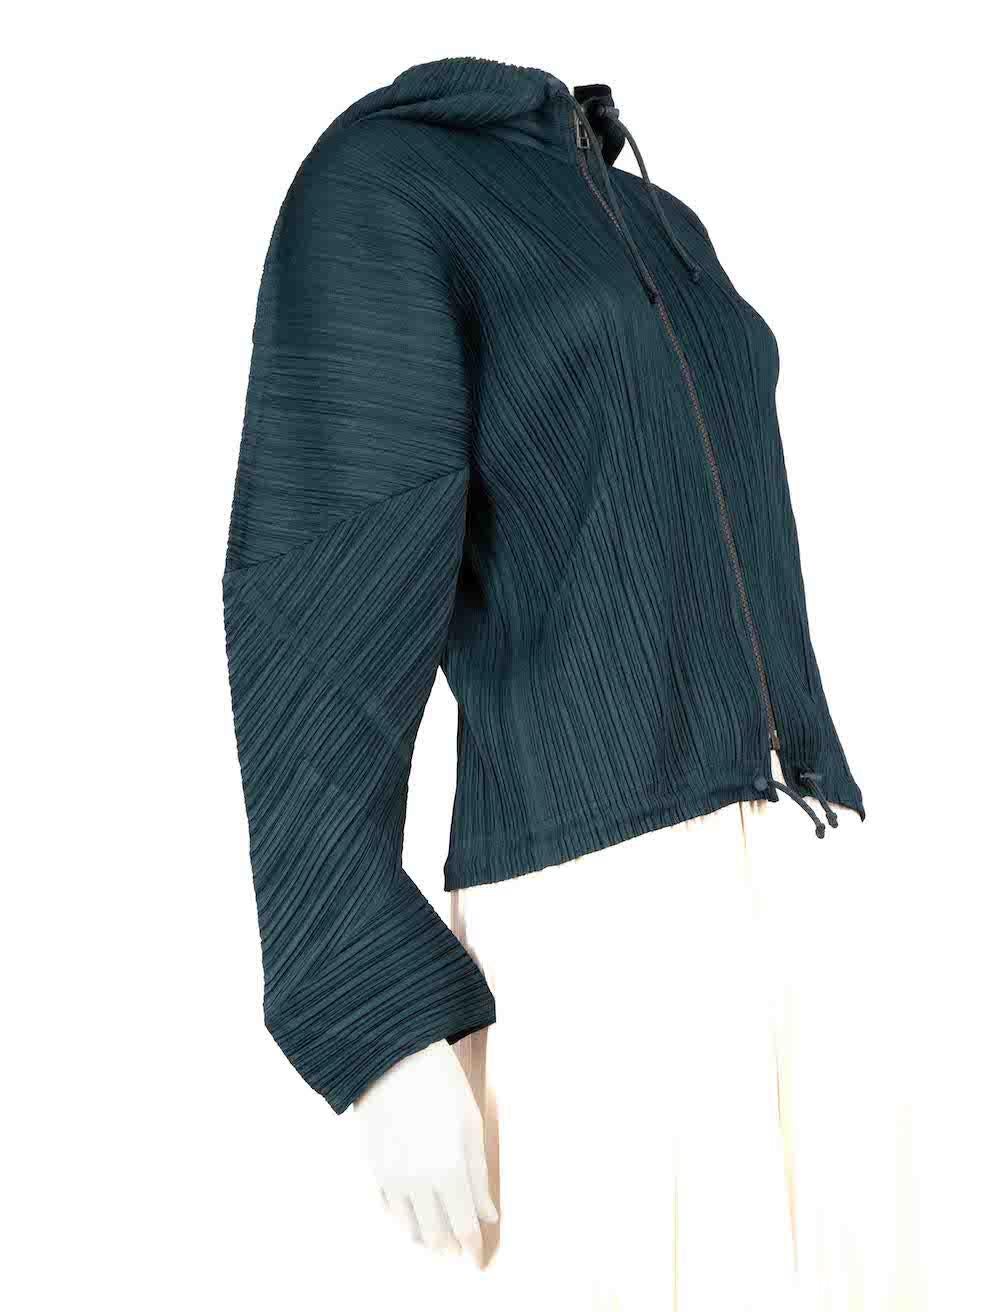 CONDITION is Very good. Minimal wear to the jacket is evident. Small mark to the left shoulder on this used Pleats Please designer resale item. Please note that the composition and care label are in Japanese.
 
 
 
 Details
 
 
 Green
 
 Polyester
